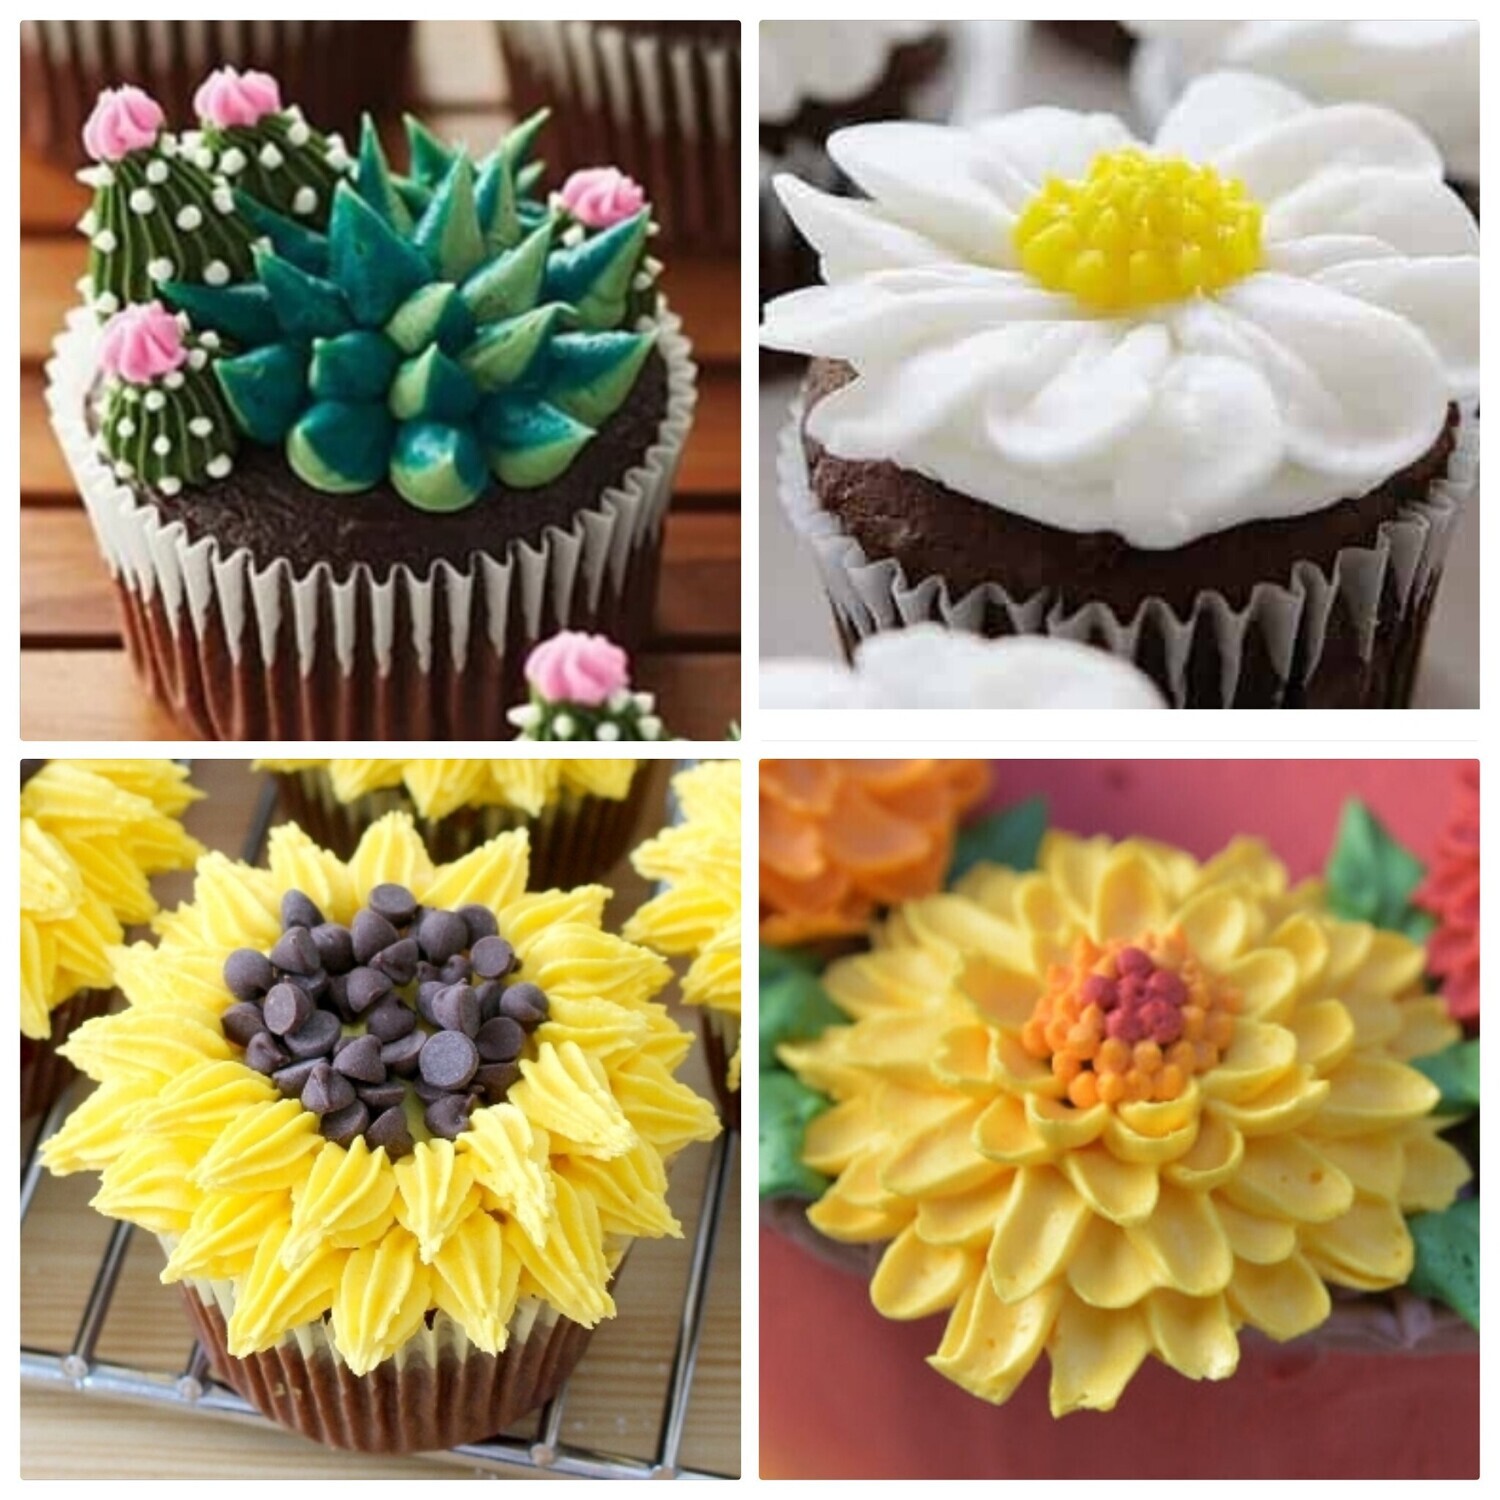 Flower Theme Cupcakes*June 17th*12pm